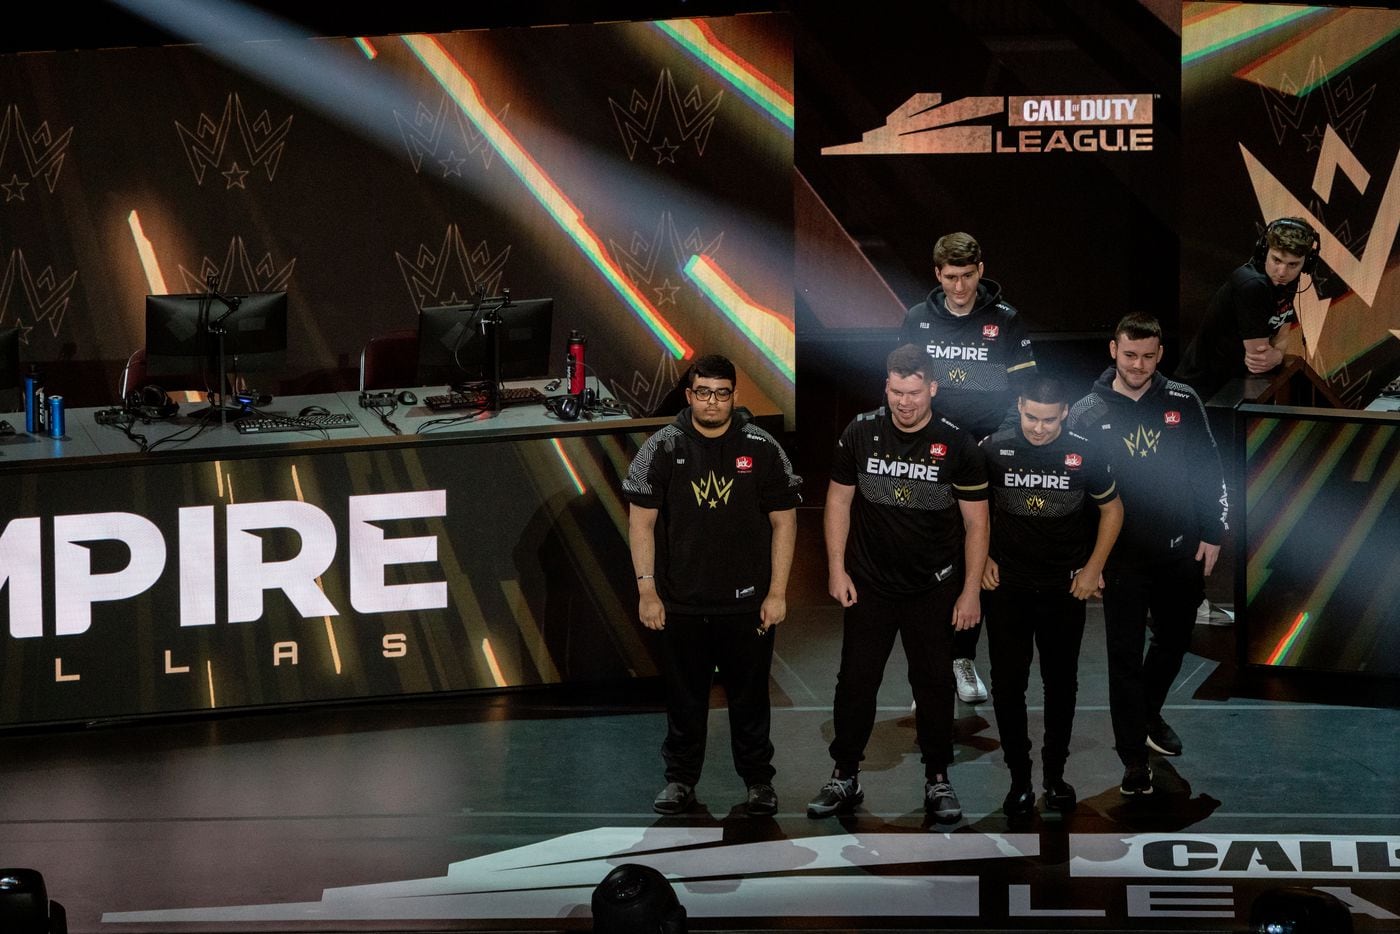 The Dallas Empire is introduced at the start winners final of the Call of Duty league playoffs against the Atlanta FaZe  at the Galen Center on Saturday, August 21, 2021 in Los Angeles, California. The Empire lost to FaZe 0 - 3 in their first match of the day but are still in contention to play in the finals through the elimination finals. (Justin L. Stewart/Special Contributor)